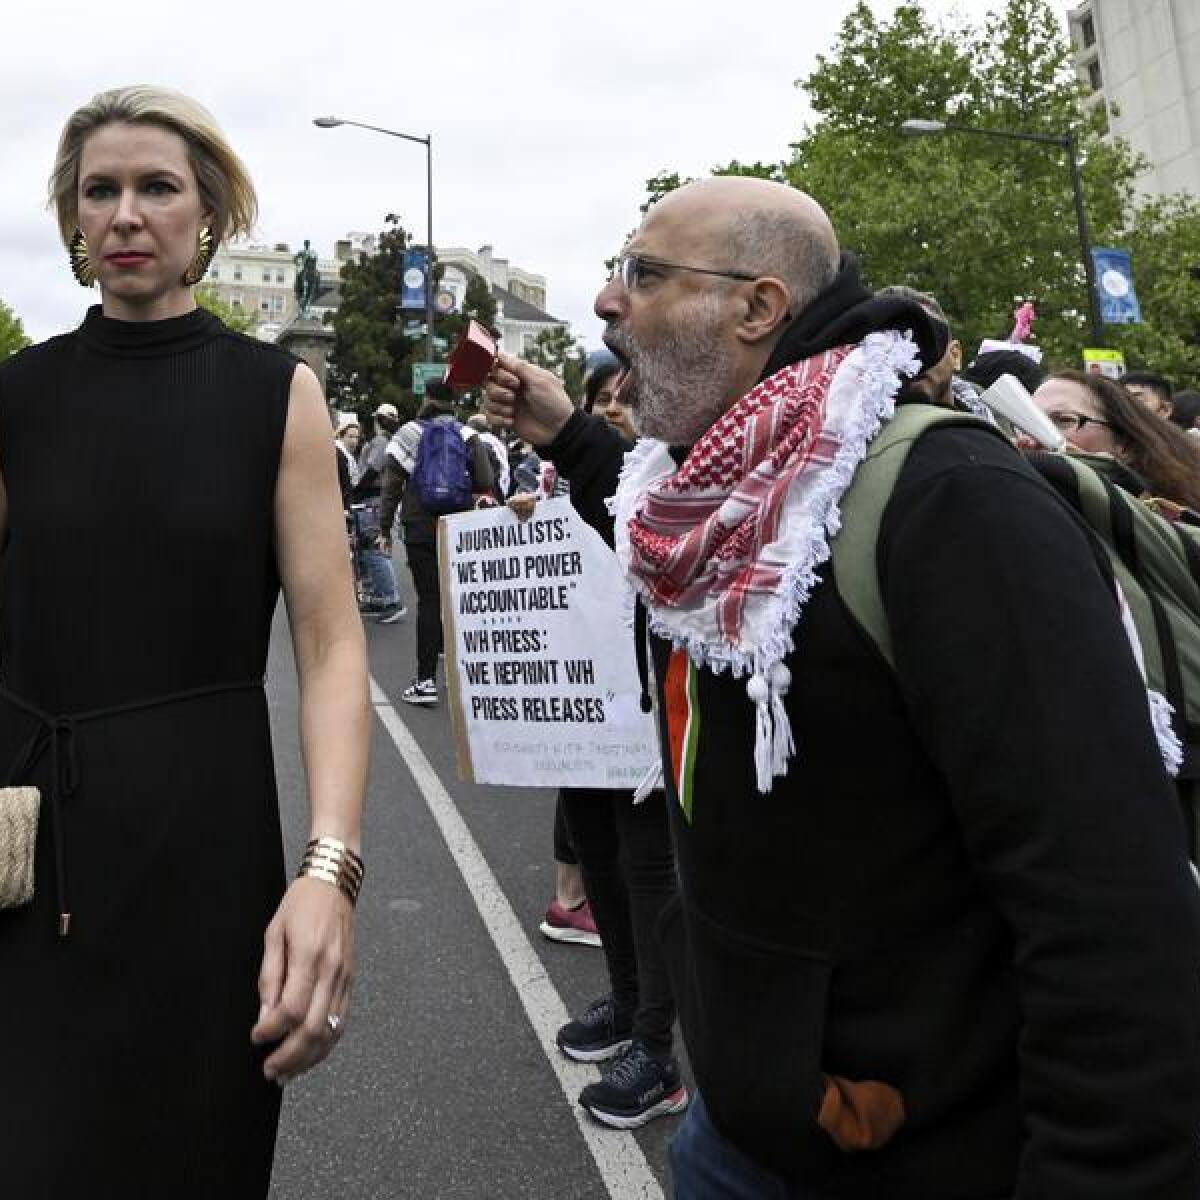 A women confronted by a demonstrator